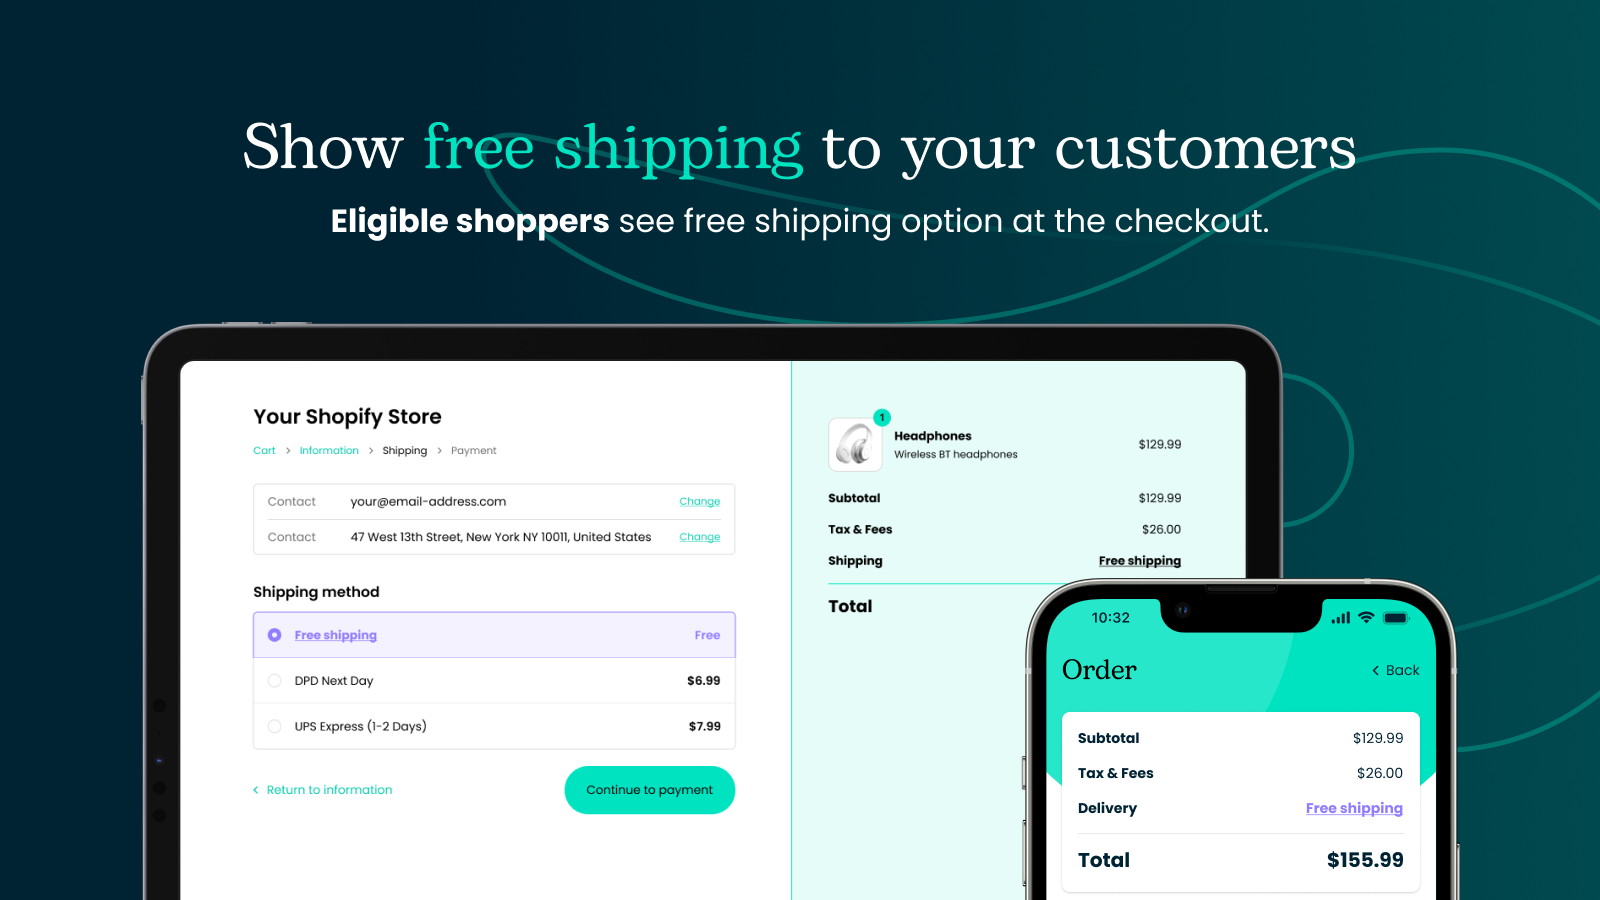 Display Free shipping to your customers in your Shopify store